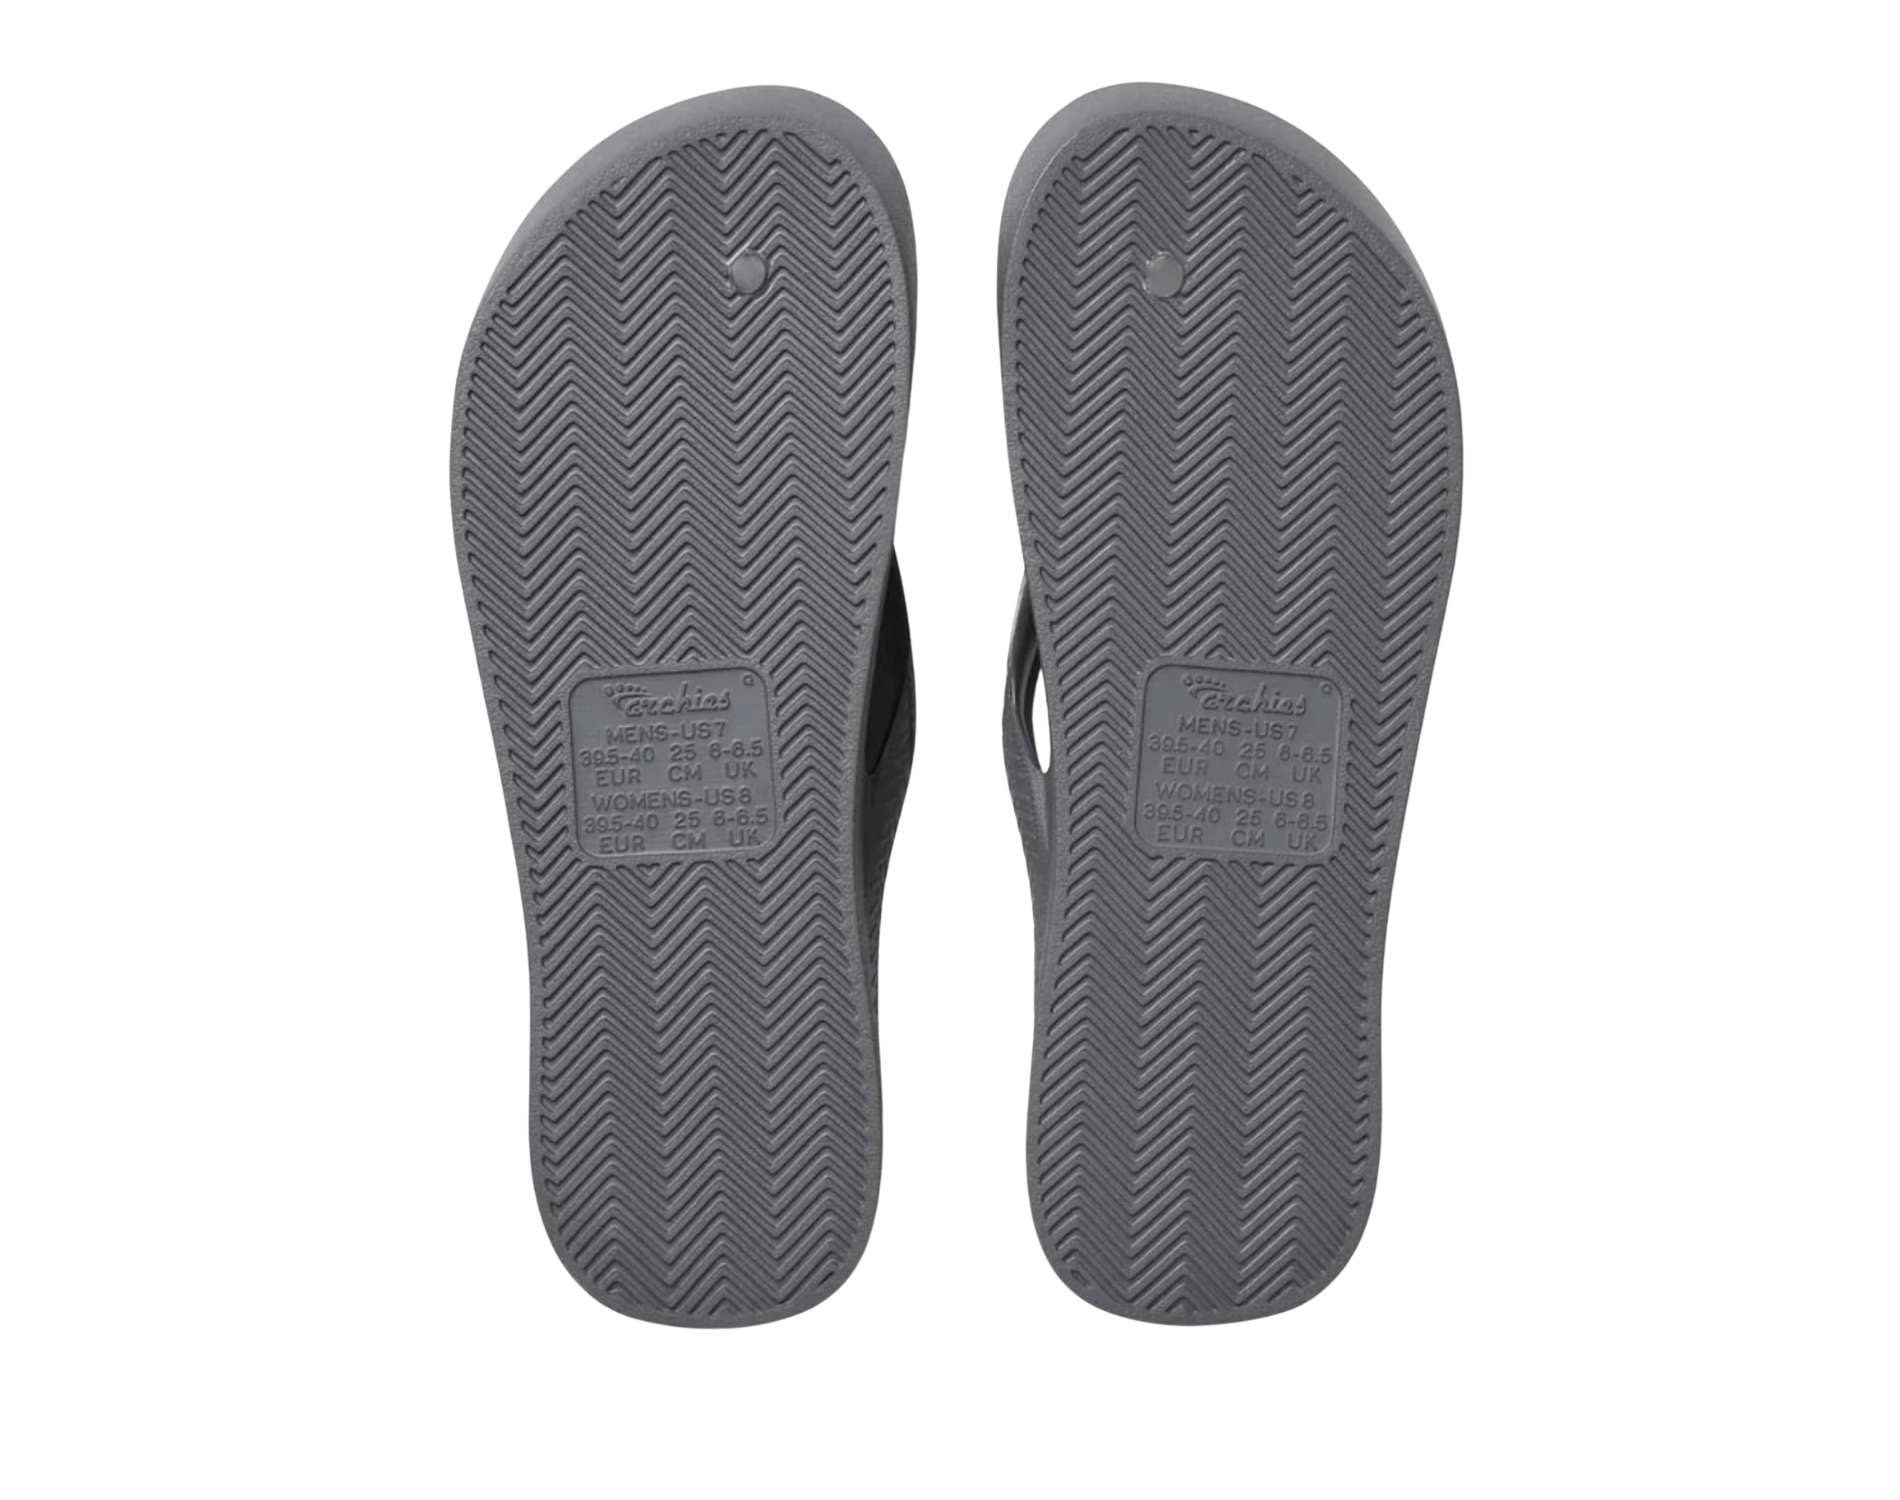 Archie arch support thongs in charcoal colour